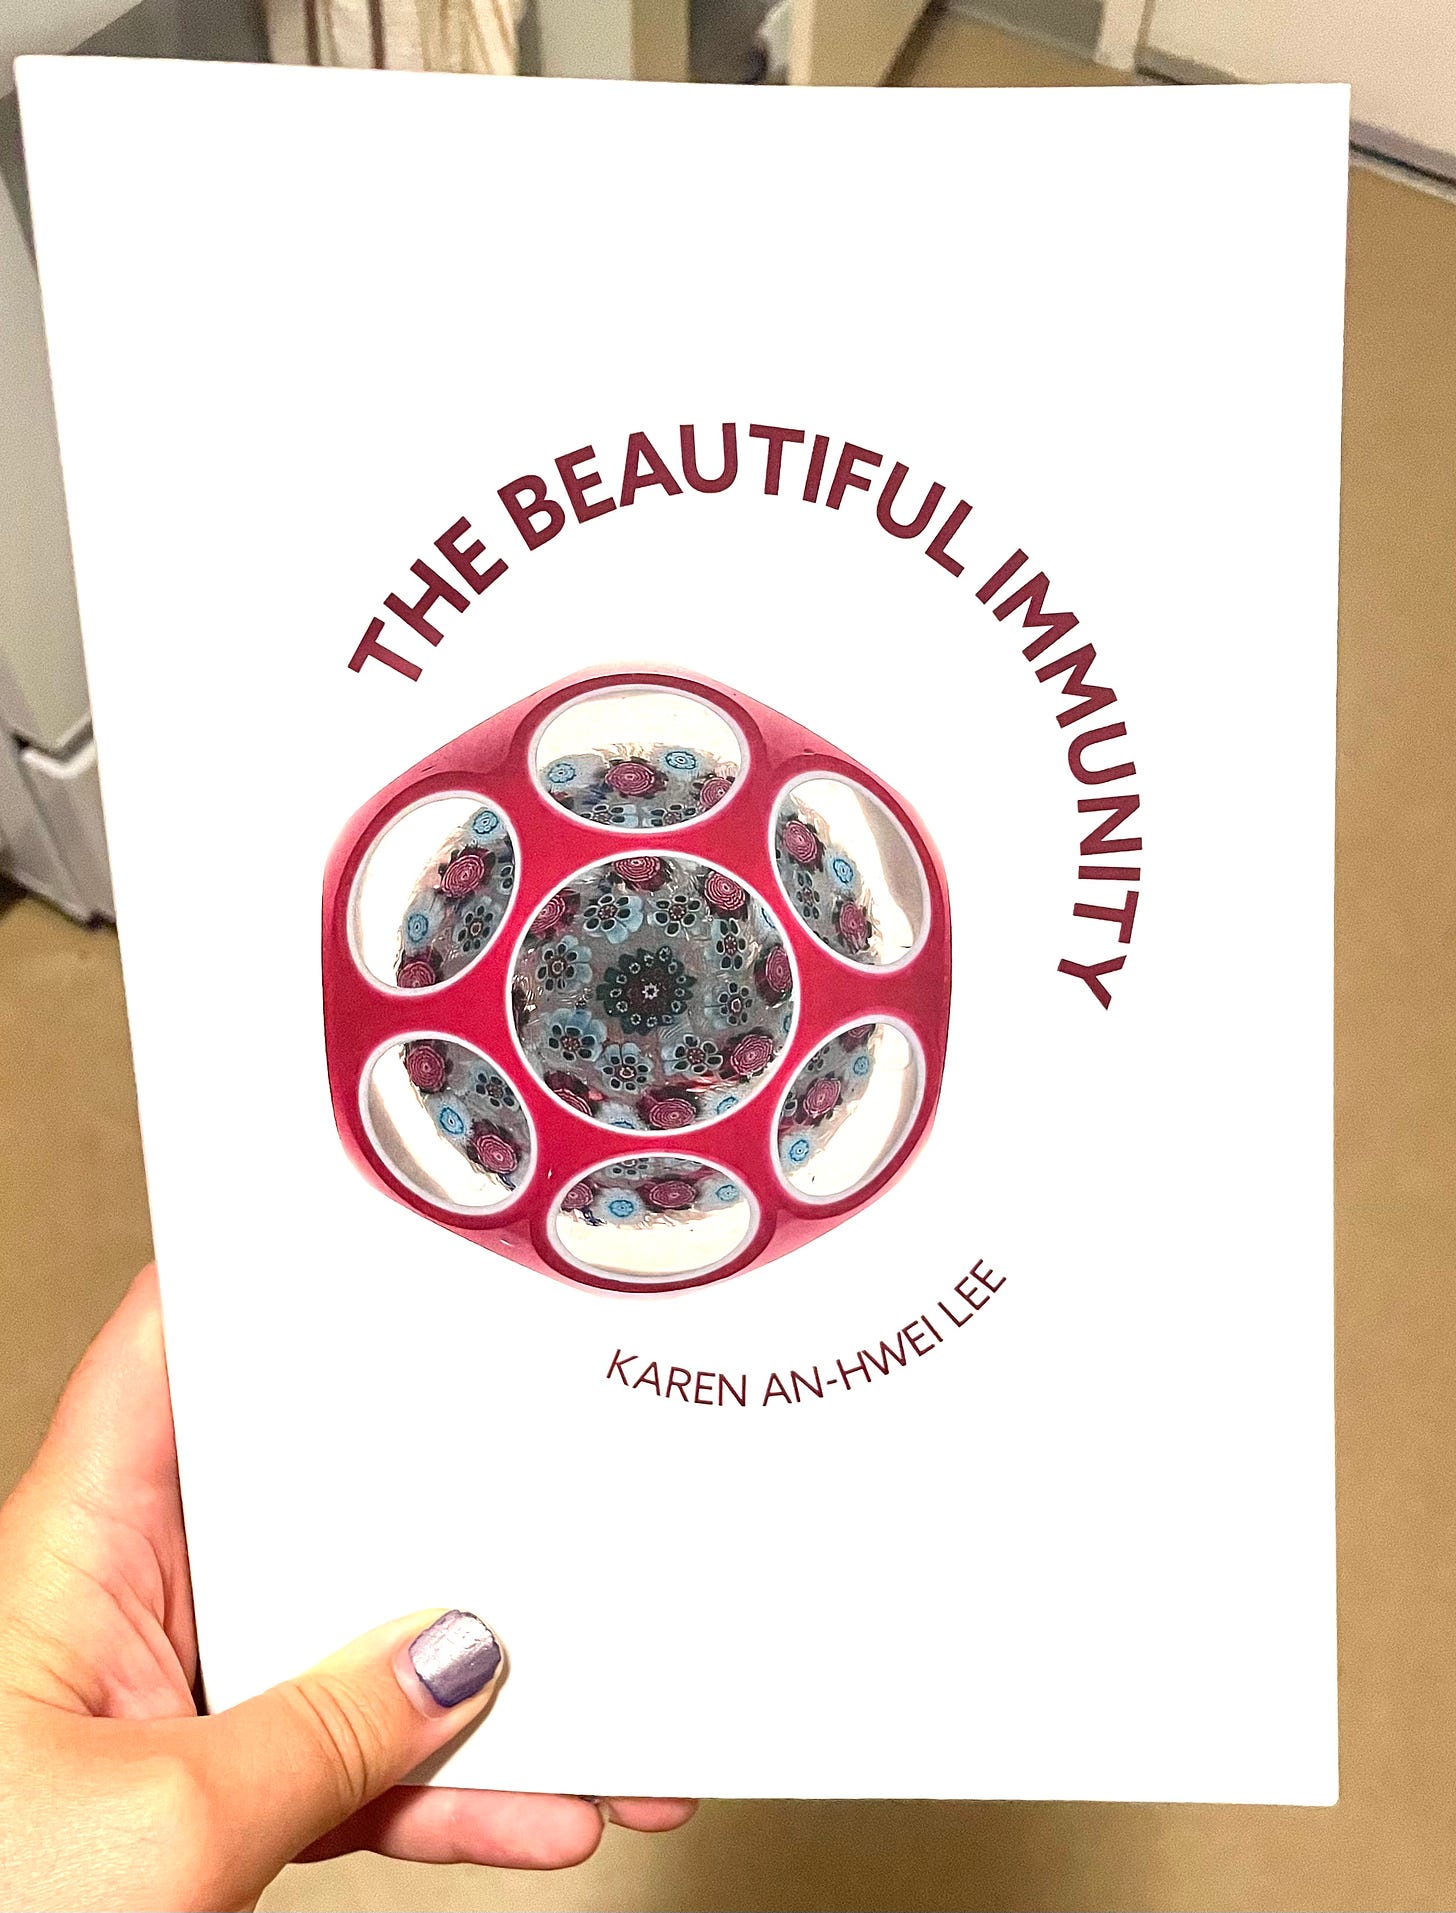 Me holding my copy of "The Beautiful Immunity" by Karen An-Hwei Lee